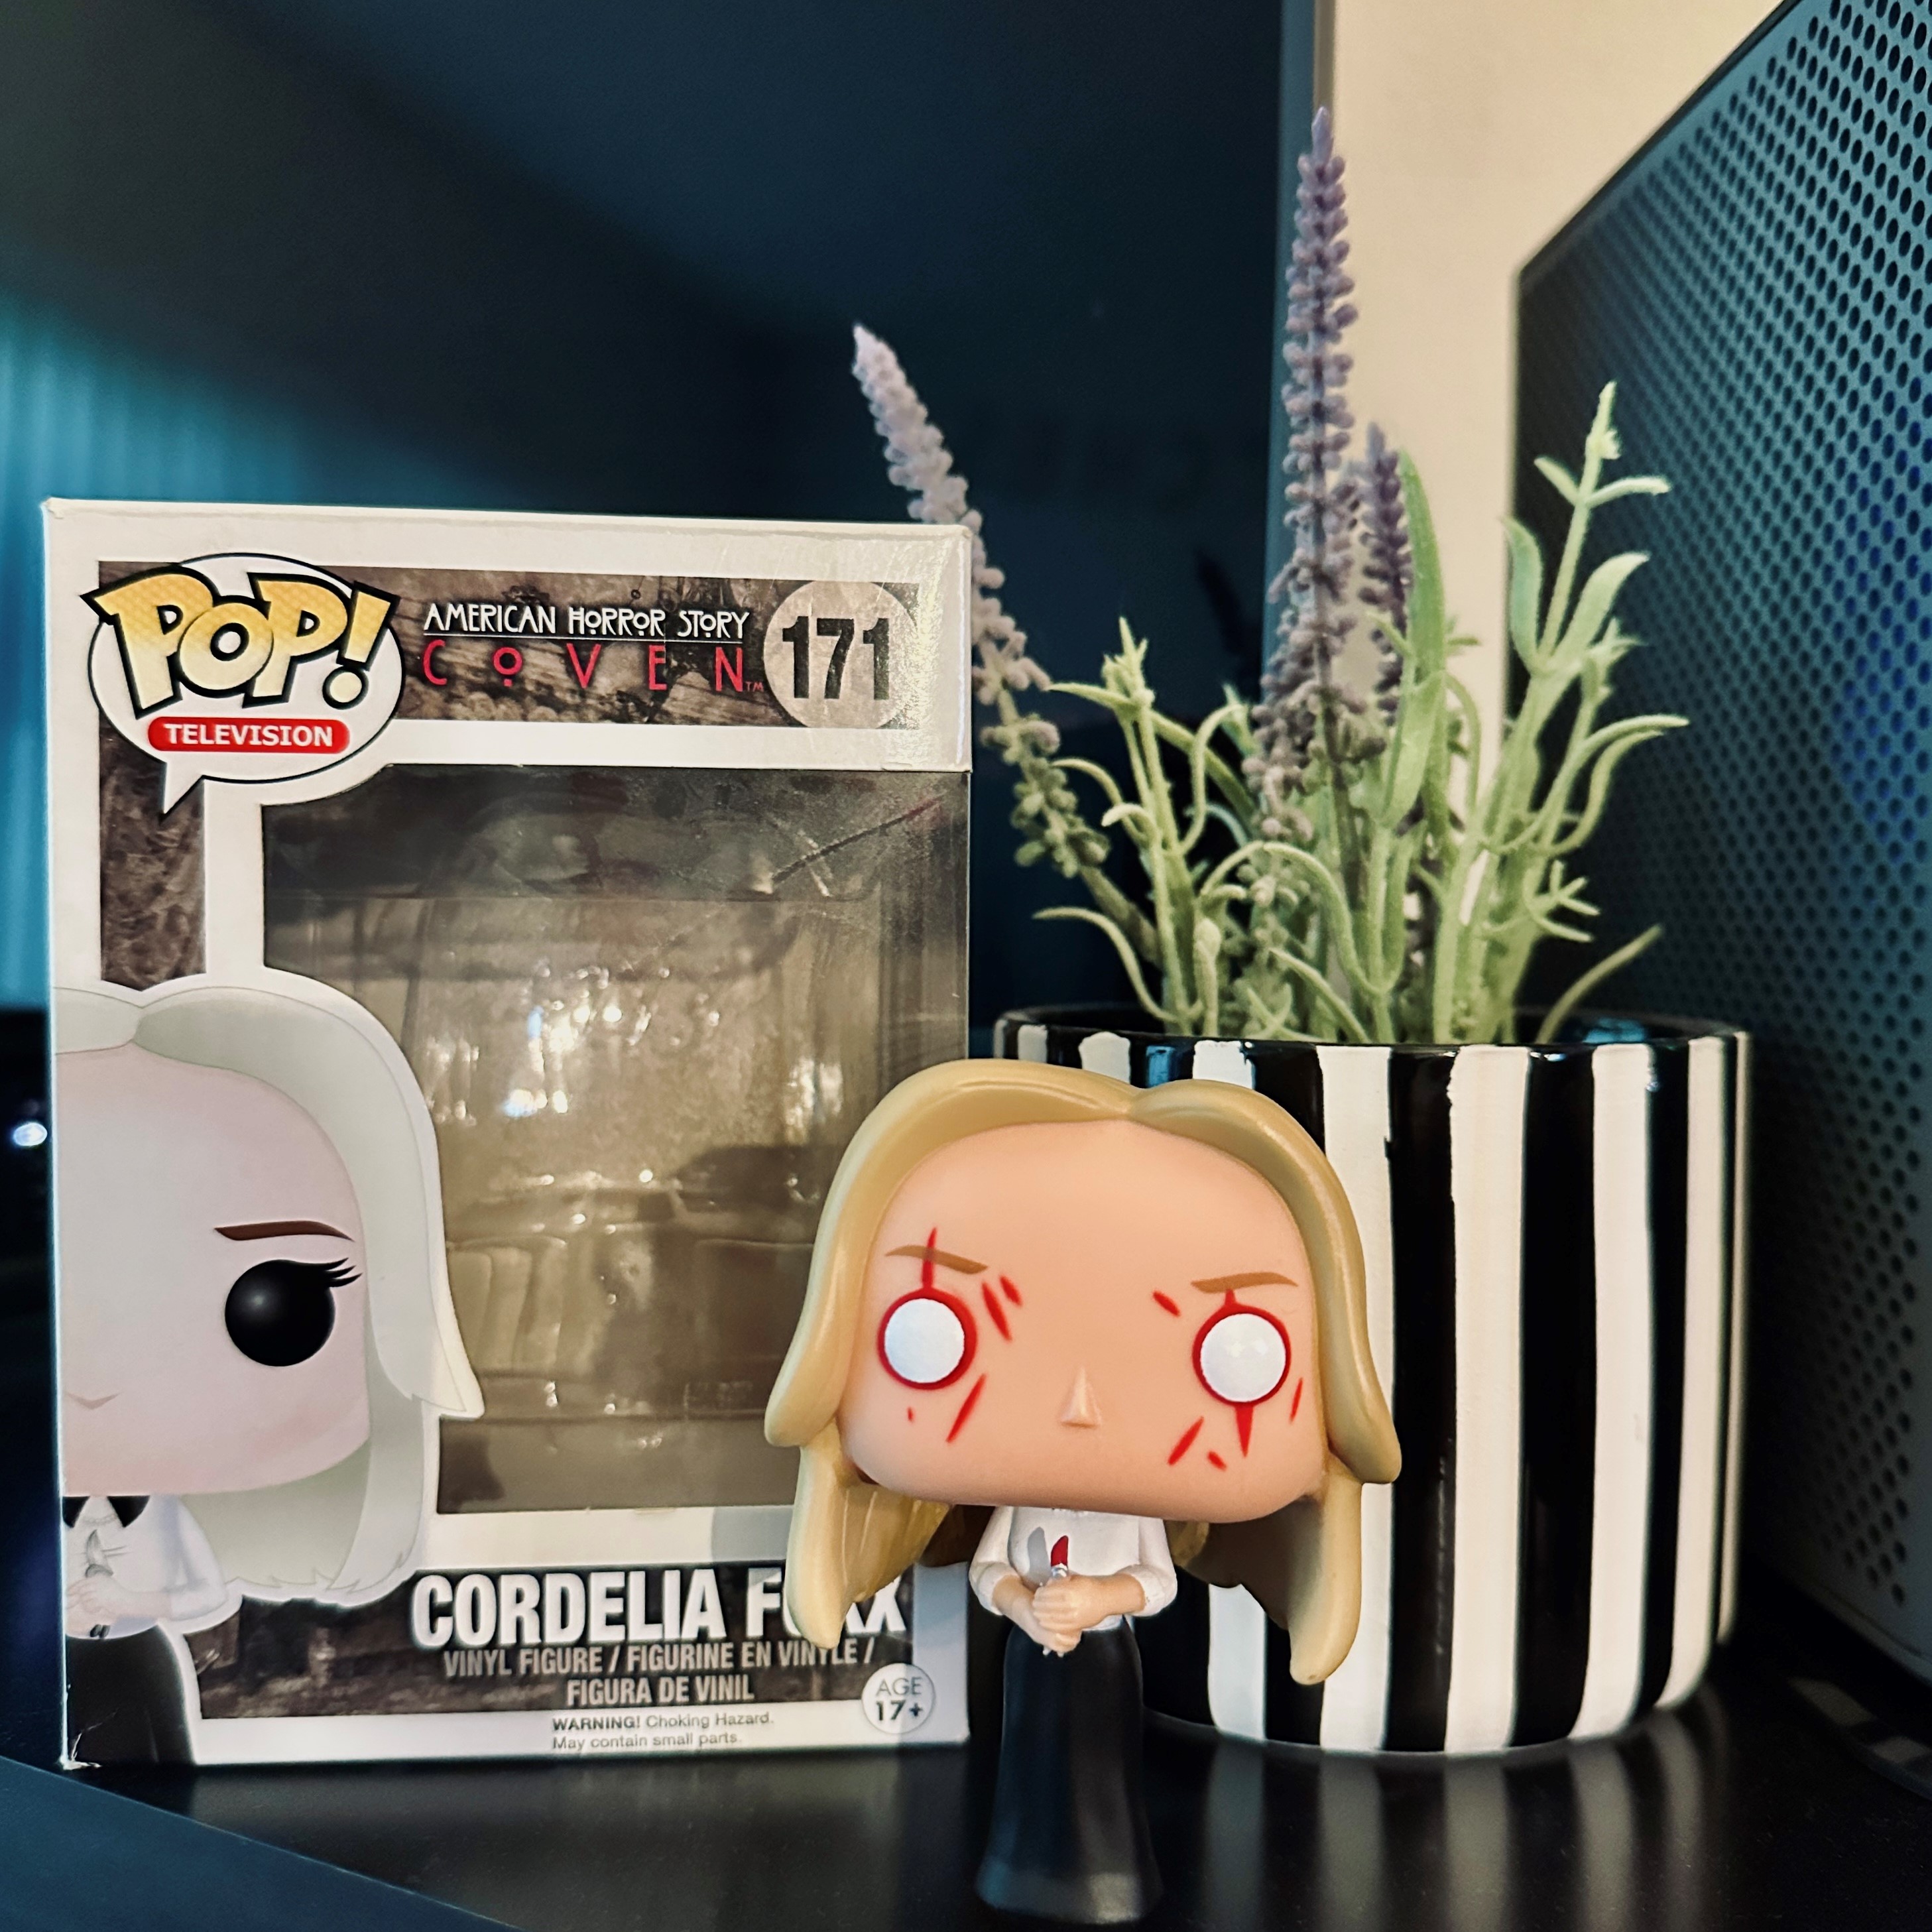 Pop! Cordelia Foxx, set on a stand, in front of her Pop! box and a plant in a black-and-white-striped vase.